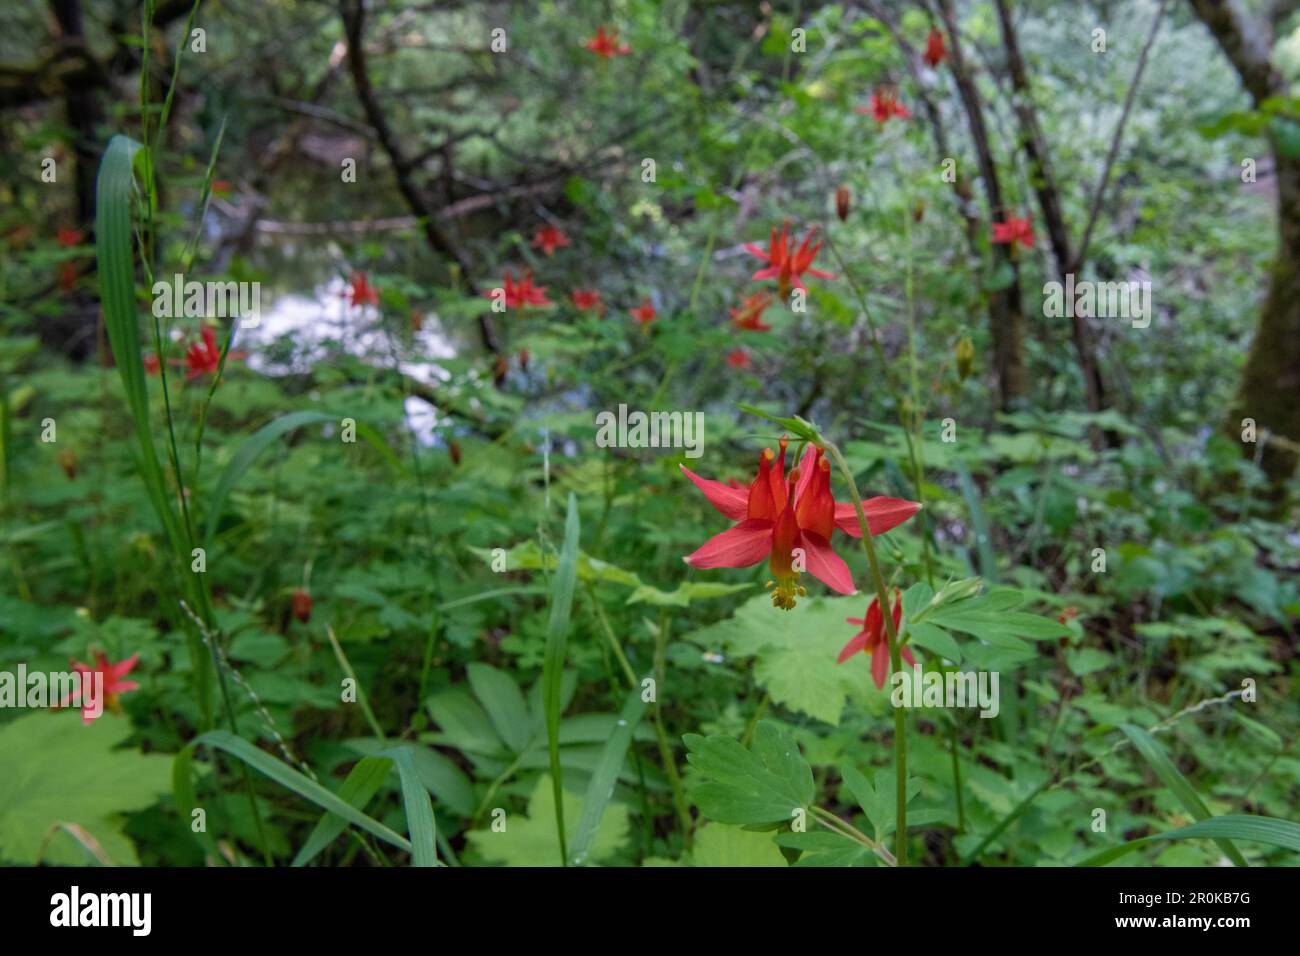 Aquilegia formosa, western columbine flowering in a forest understory in California. Stock Photo